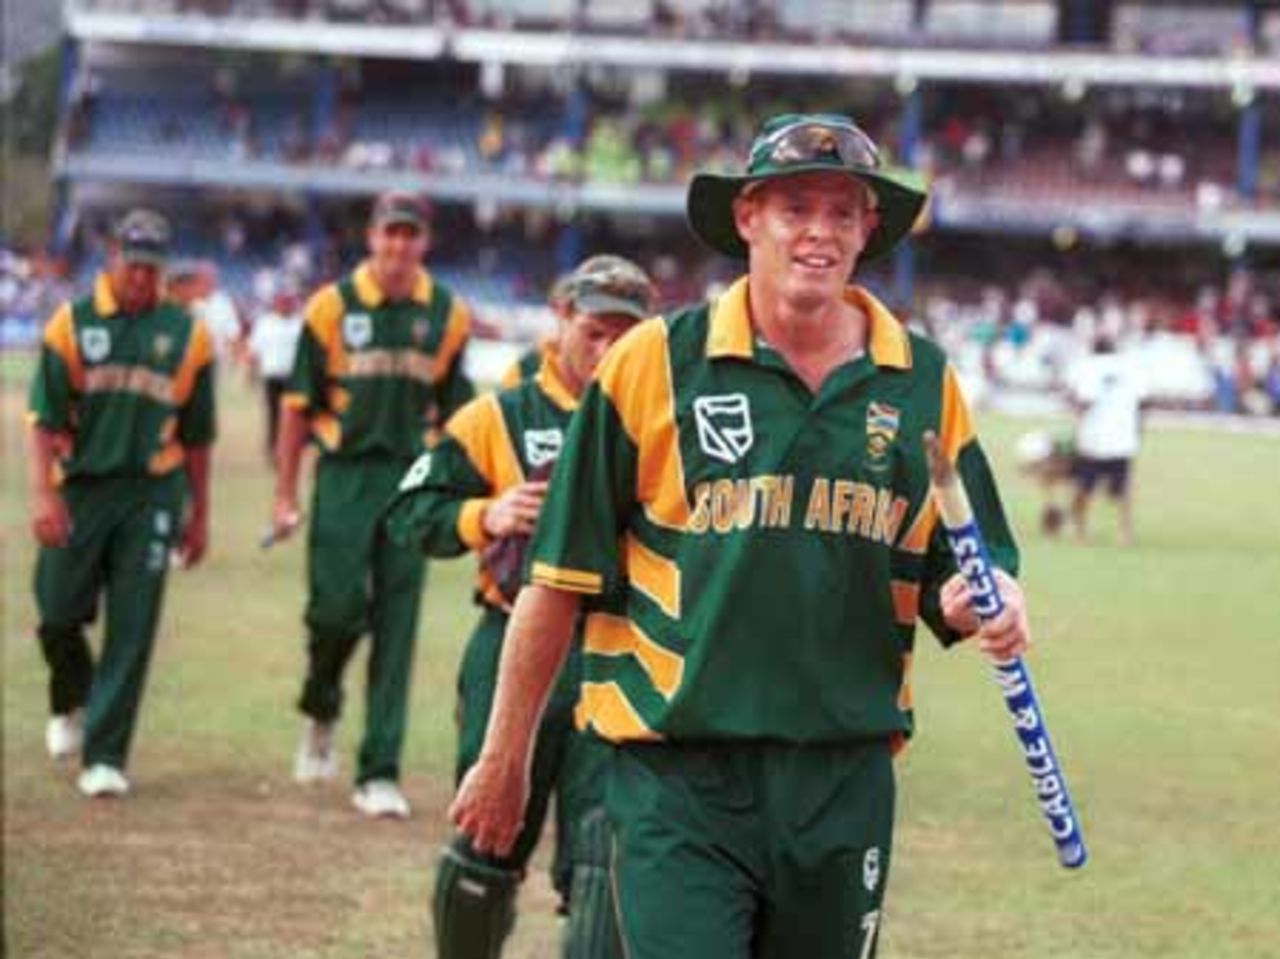 West Indies v South Africa, 6th ODI,  Queen's Park Oval Port of Spain Trinidad, 12 May 2001